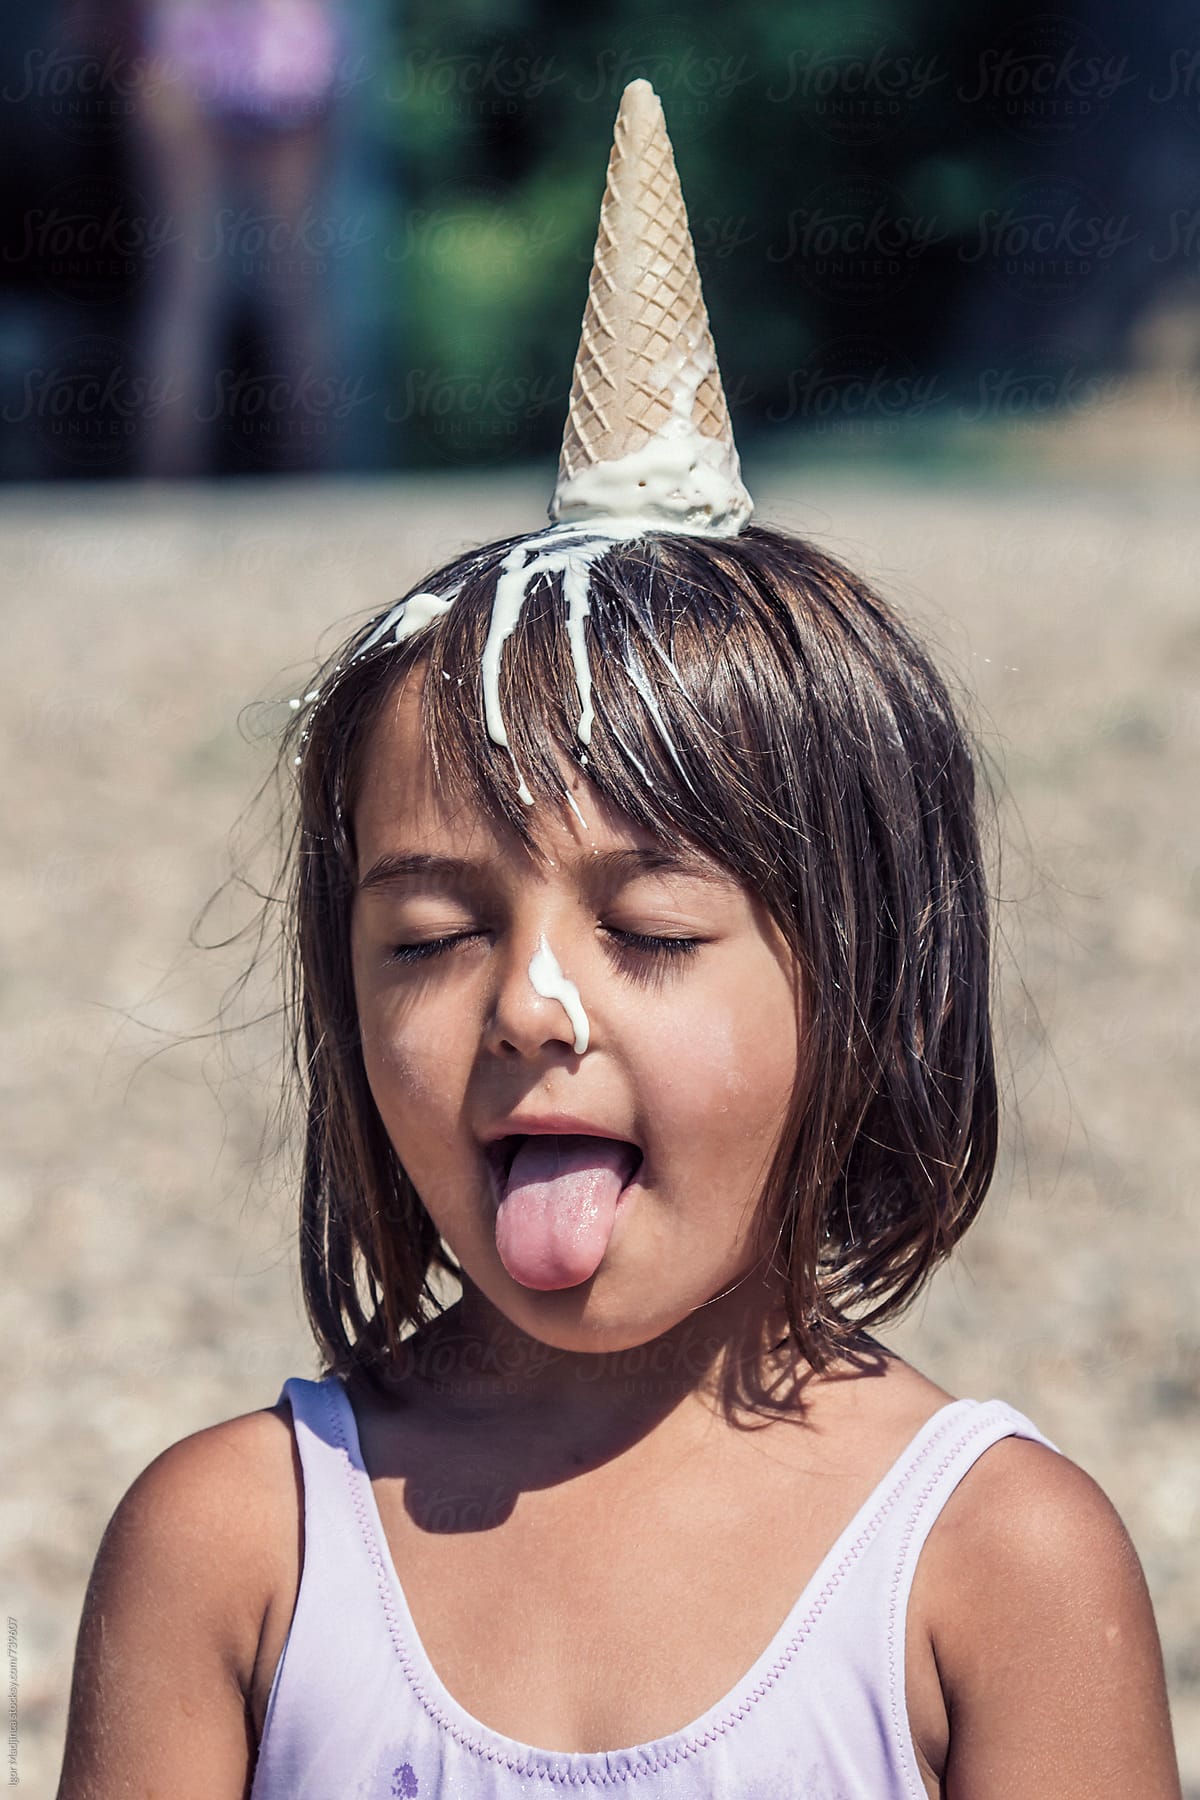 A New Way Of Eating Ice Cream Girl With Melted Ice Cream On Her Head By Stocksy Contributor